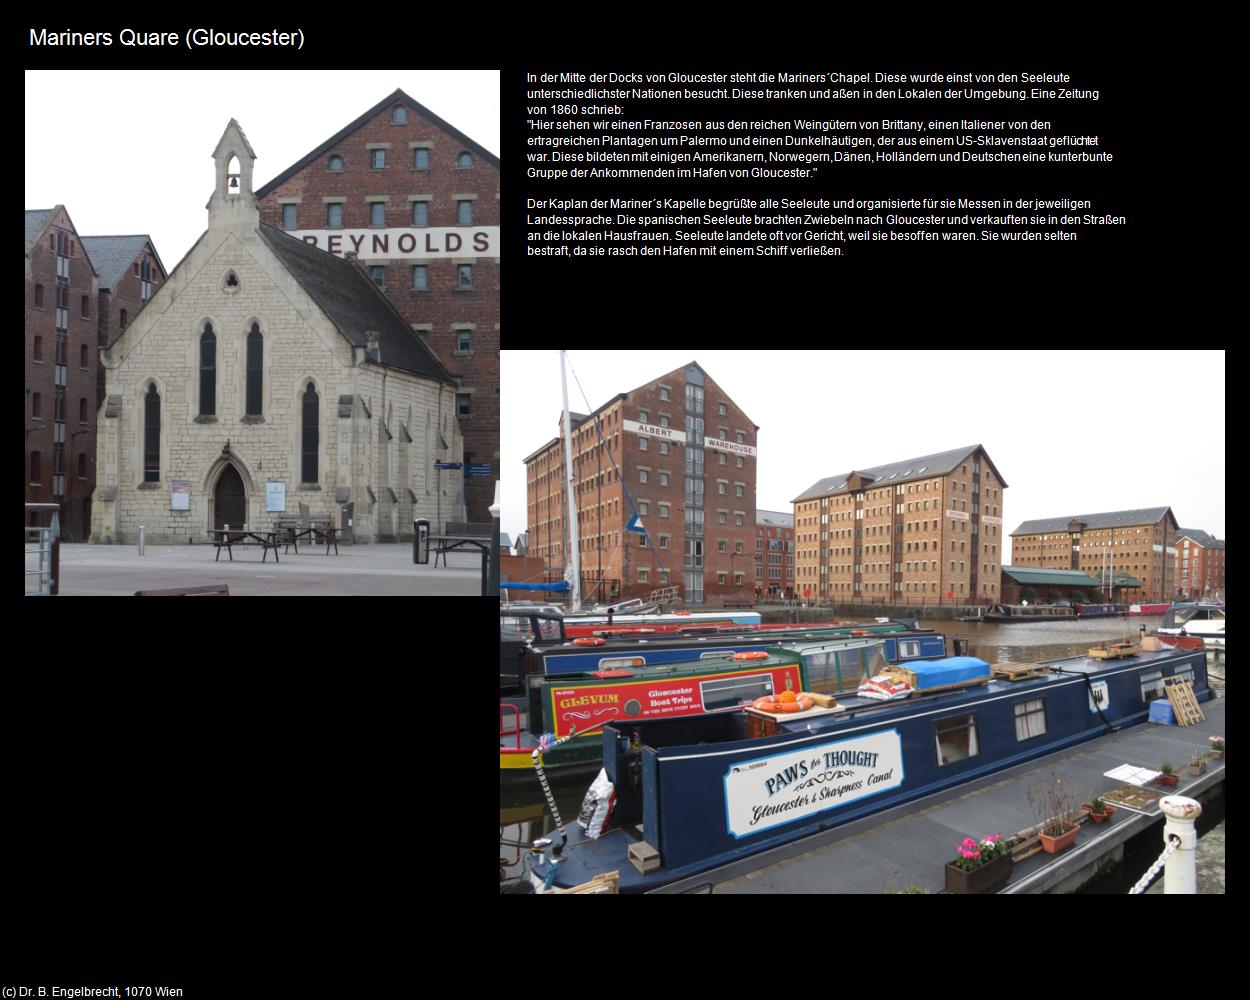 Mariners Quare             (Gloucester, England) in Kulturatlas-ENGLAND und WALES